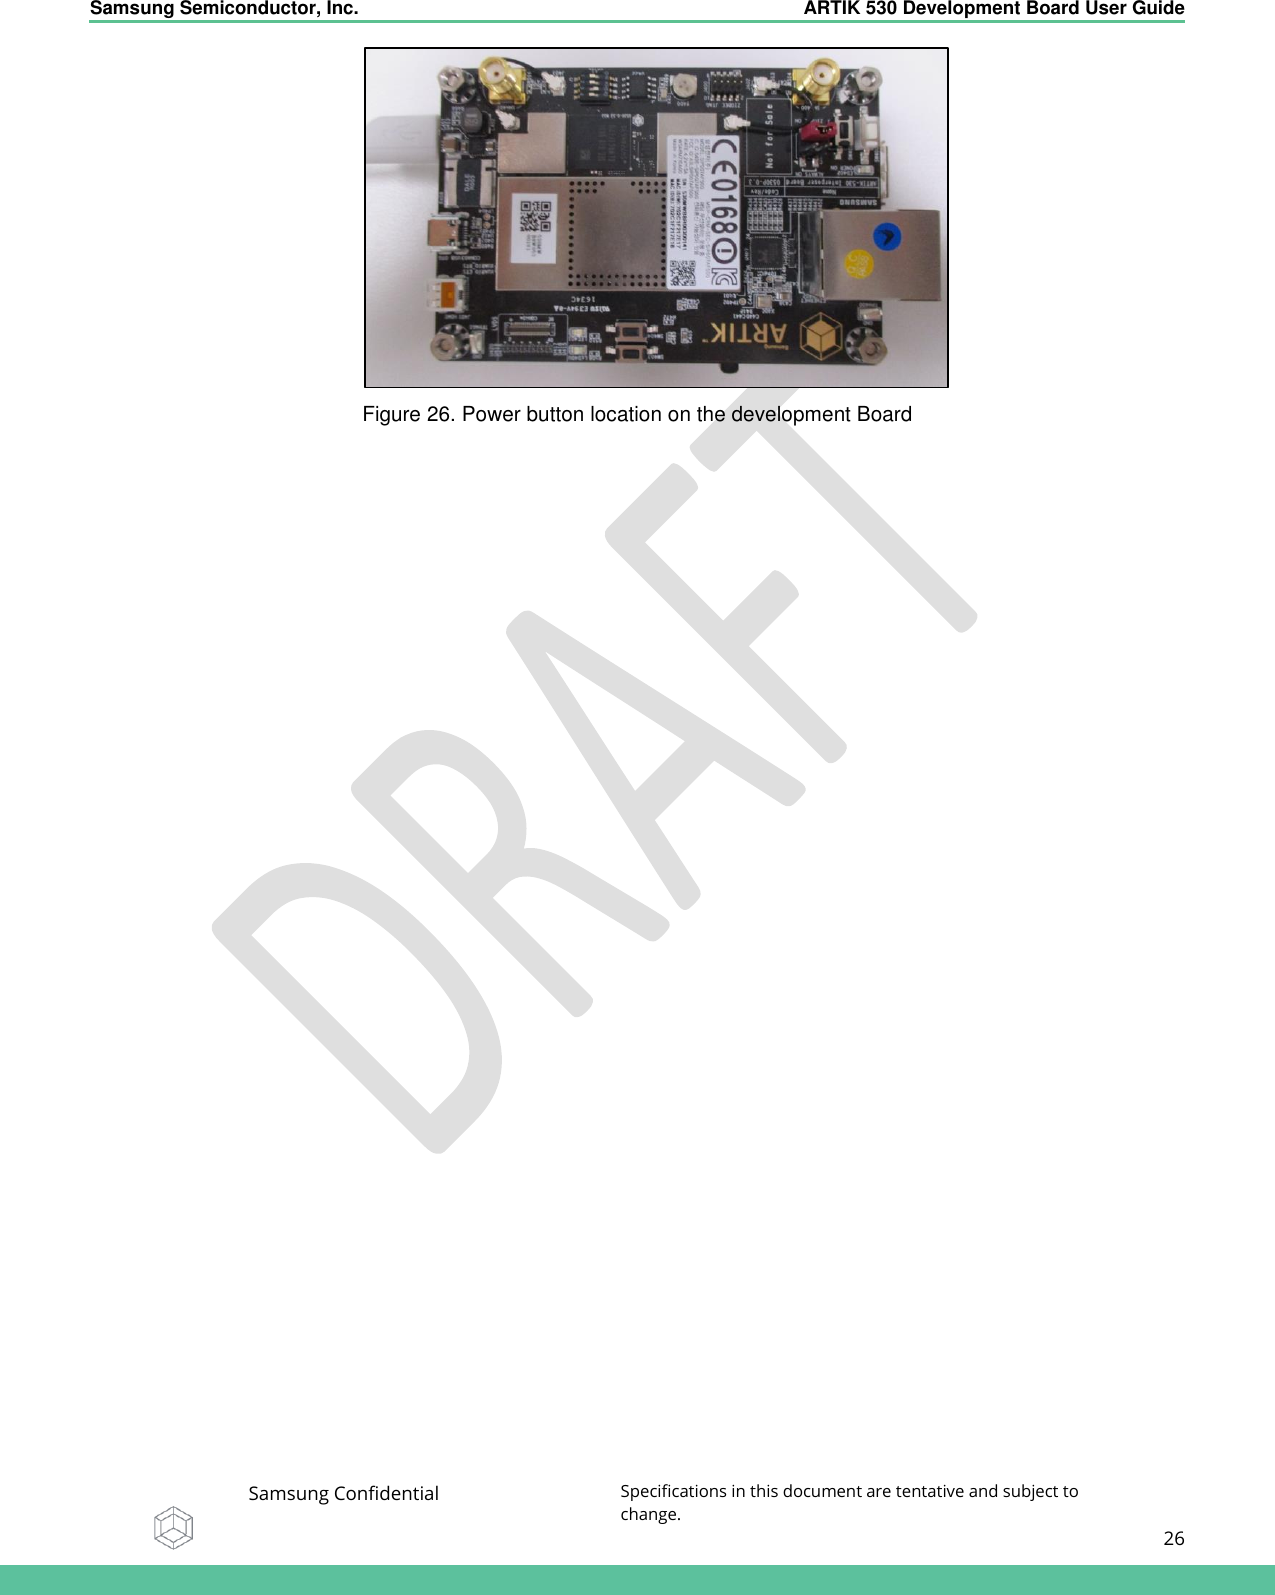    Samsung Semiconductor, Inc.  ARTIK 530 Development Board User Guide   Samsung Confidential Specifications in this document are tentative and subject to change.  26    Figure 26. Power button location on the development Board   